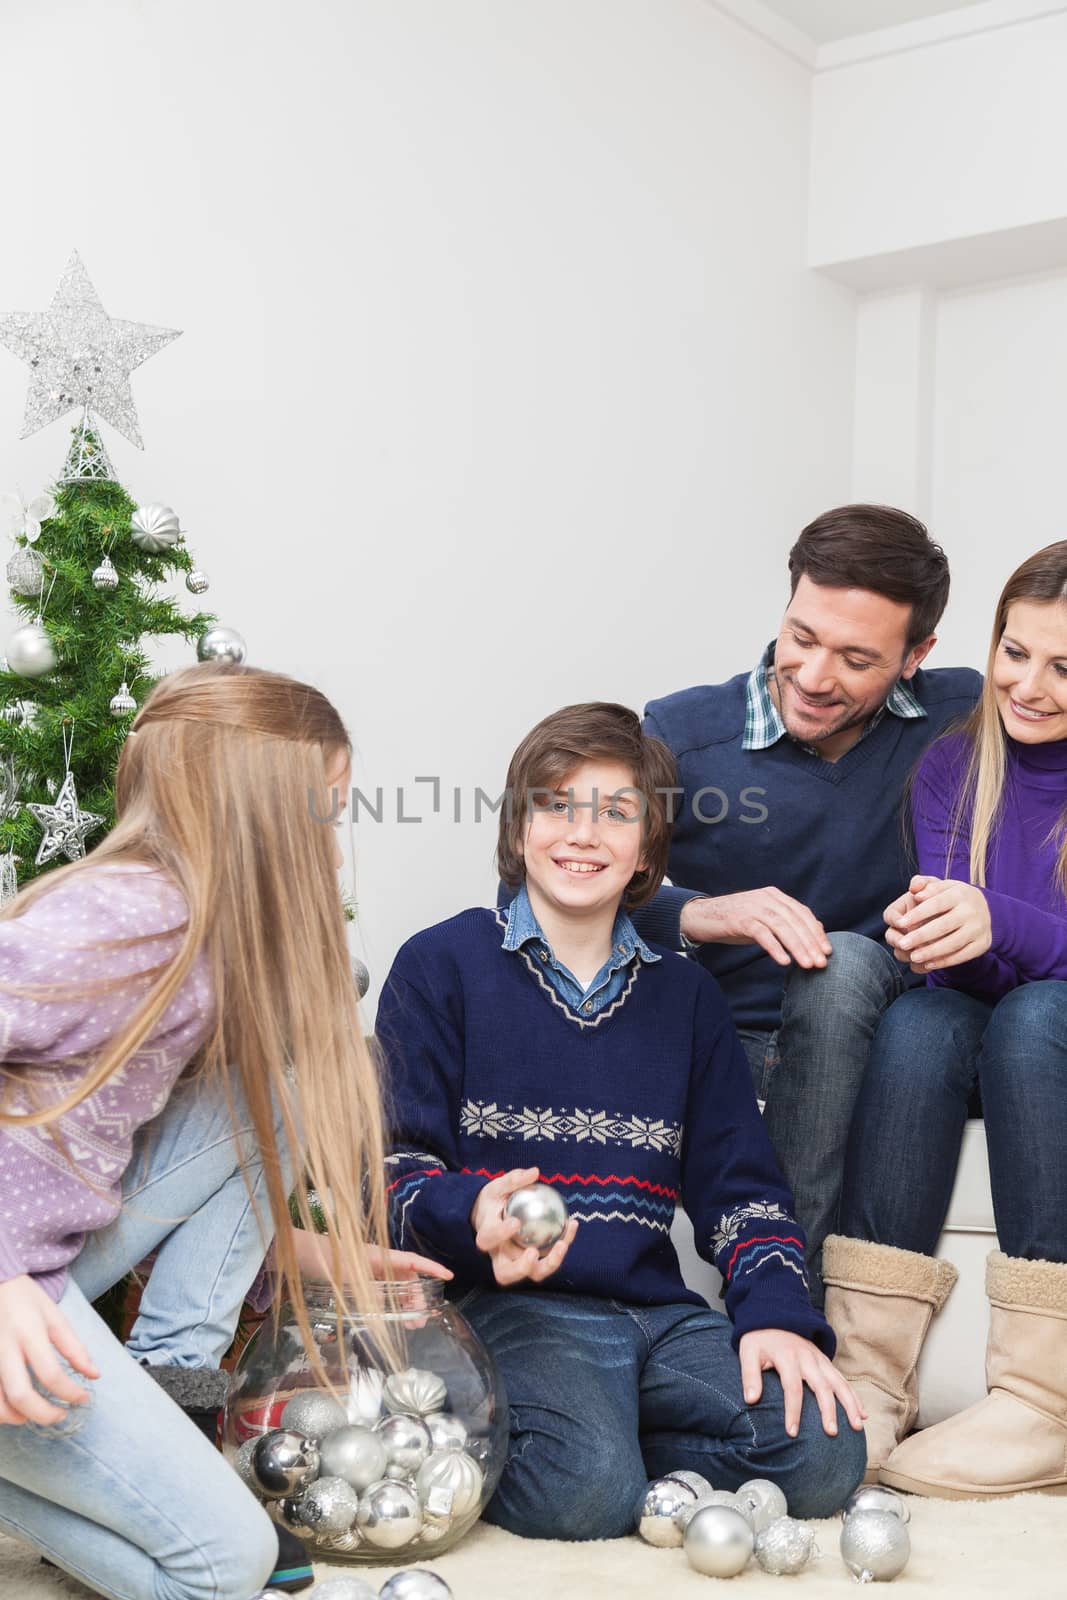 10-12, 8-10, apartment, balls, beautiful, blue, bowl, boy, brother, brothers, carpet, caucasian, celebration, child, children, christmas, cute, december, decor, decorated, decoration, festive, festivity, girl, girls, green, hanging, happiness, happy, holding, holiday, holidays, home, horizontal, look, looking, camera, house, joy, leisure, lifestyle, little, merry, model, old, open, person, property, releases, room, santa, silver, sitting, tree, years, couch, parents, 30-35, sofa, star